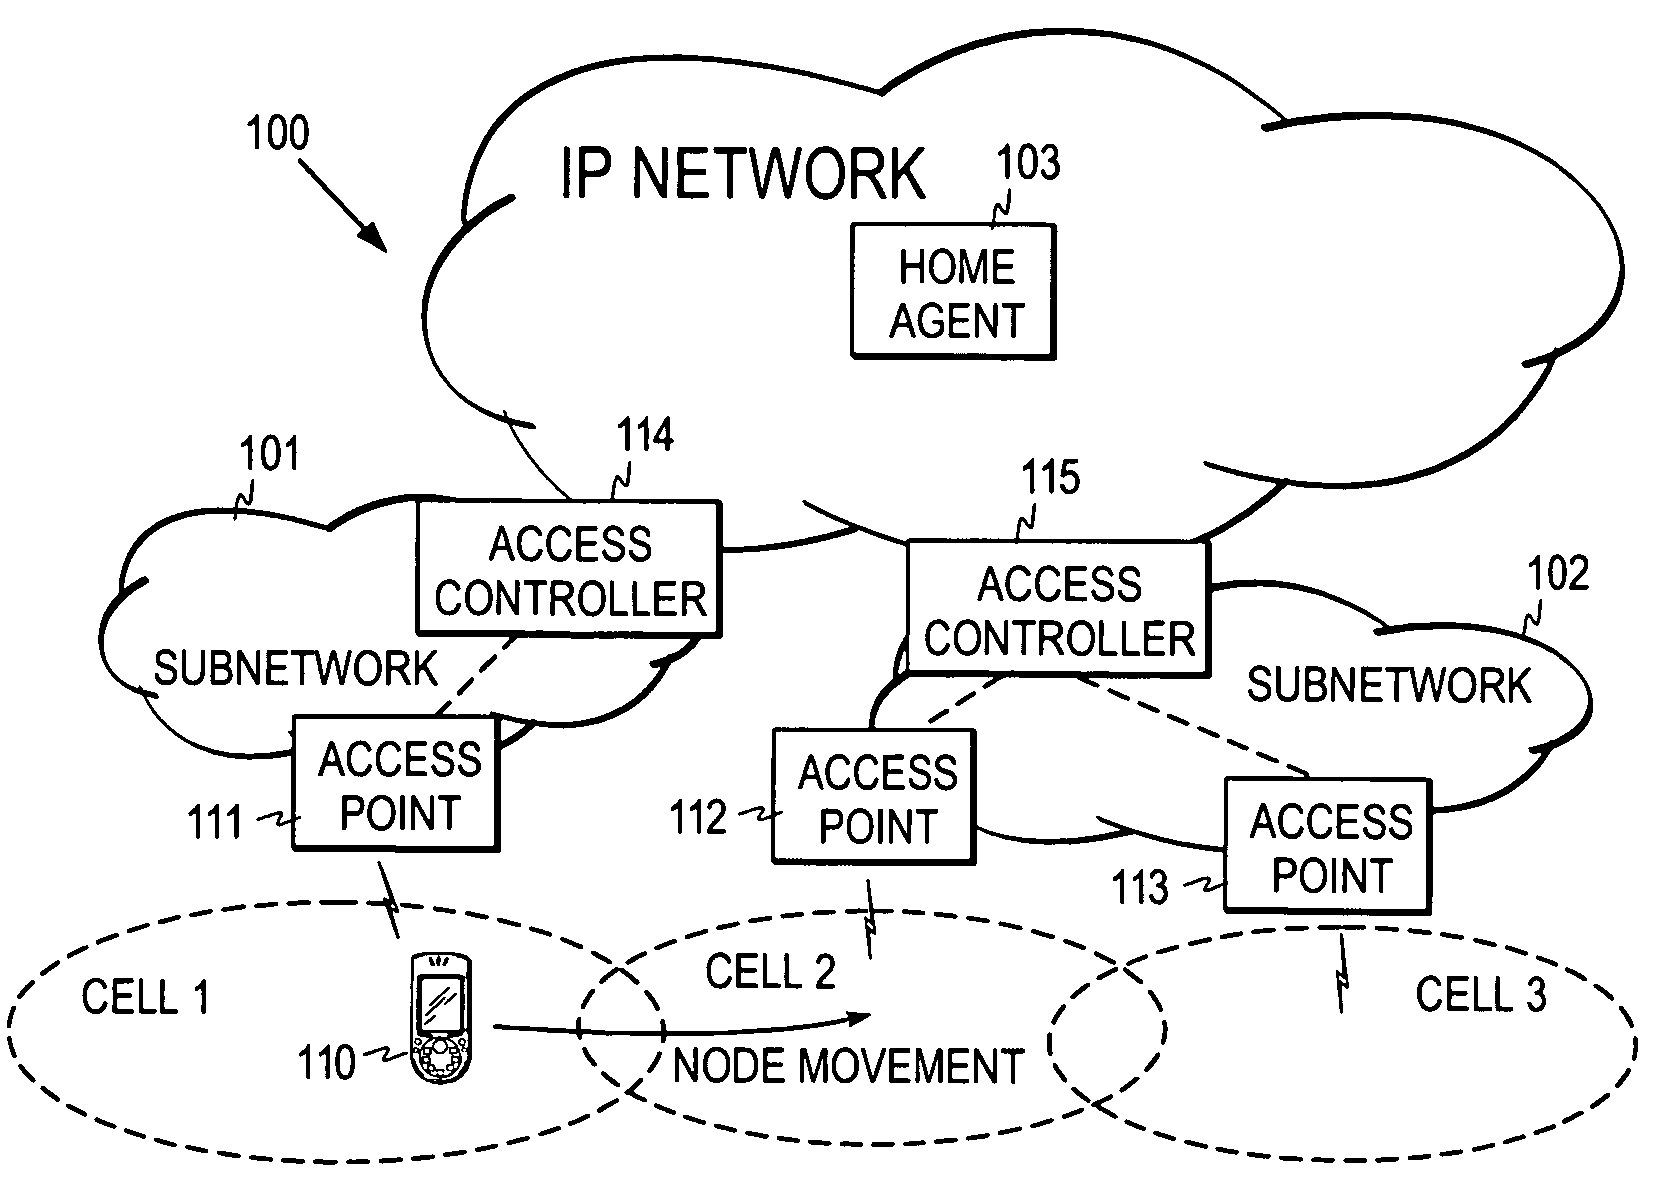 Selection of network access entity in a communication system